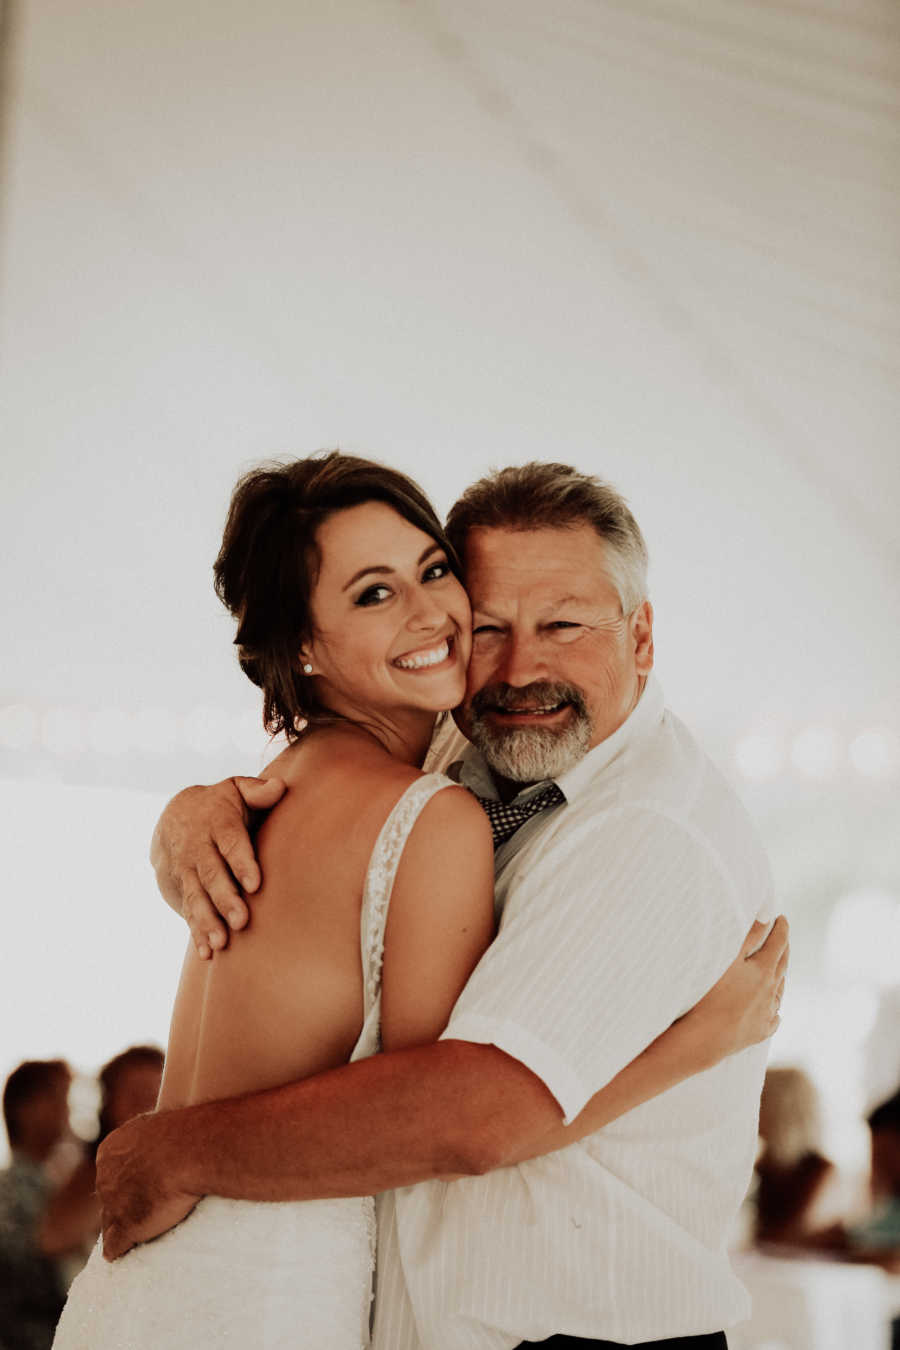 Father and bride smile while hugging at wedding reception